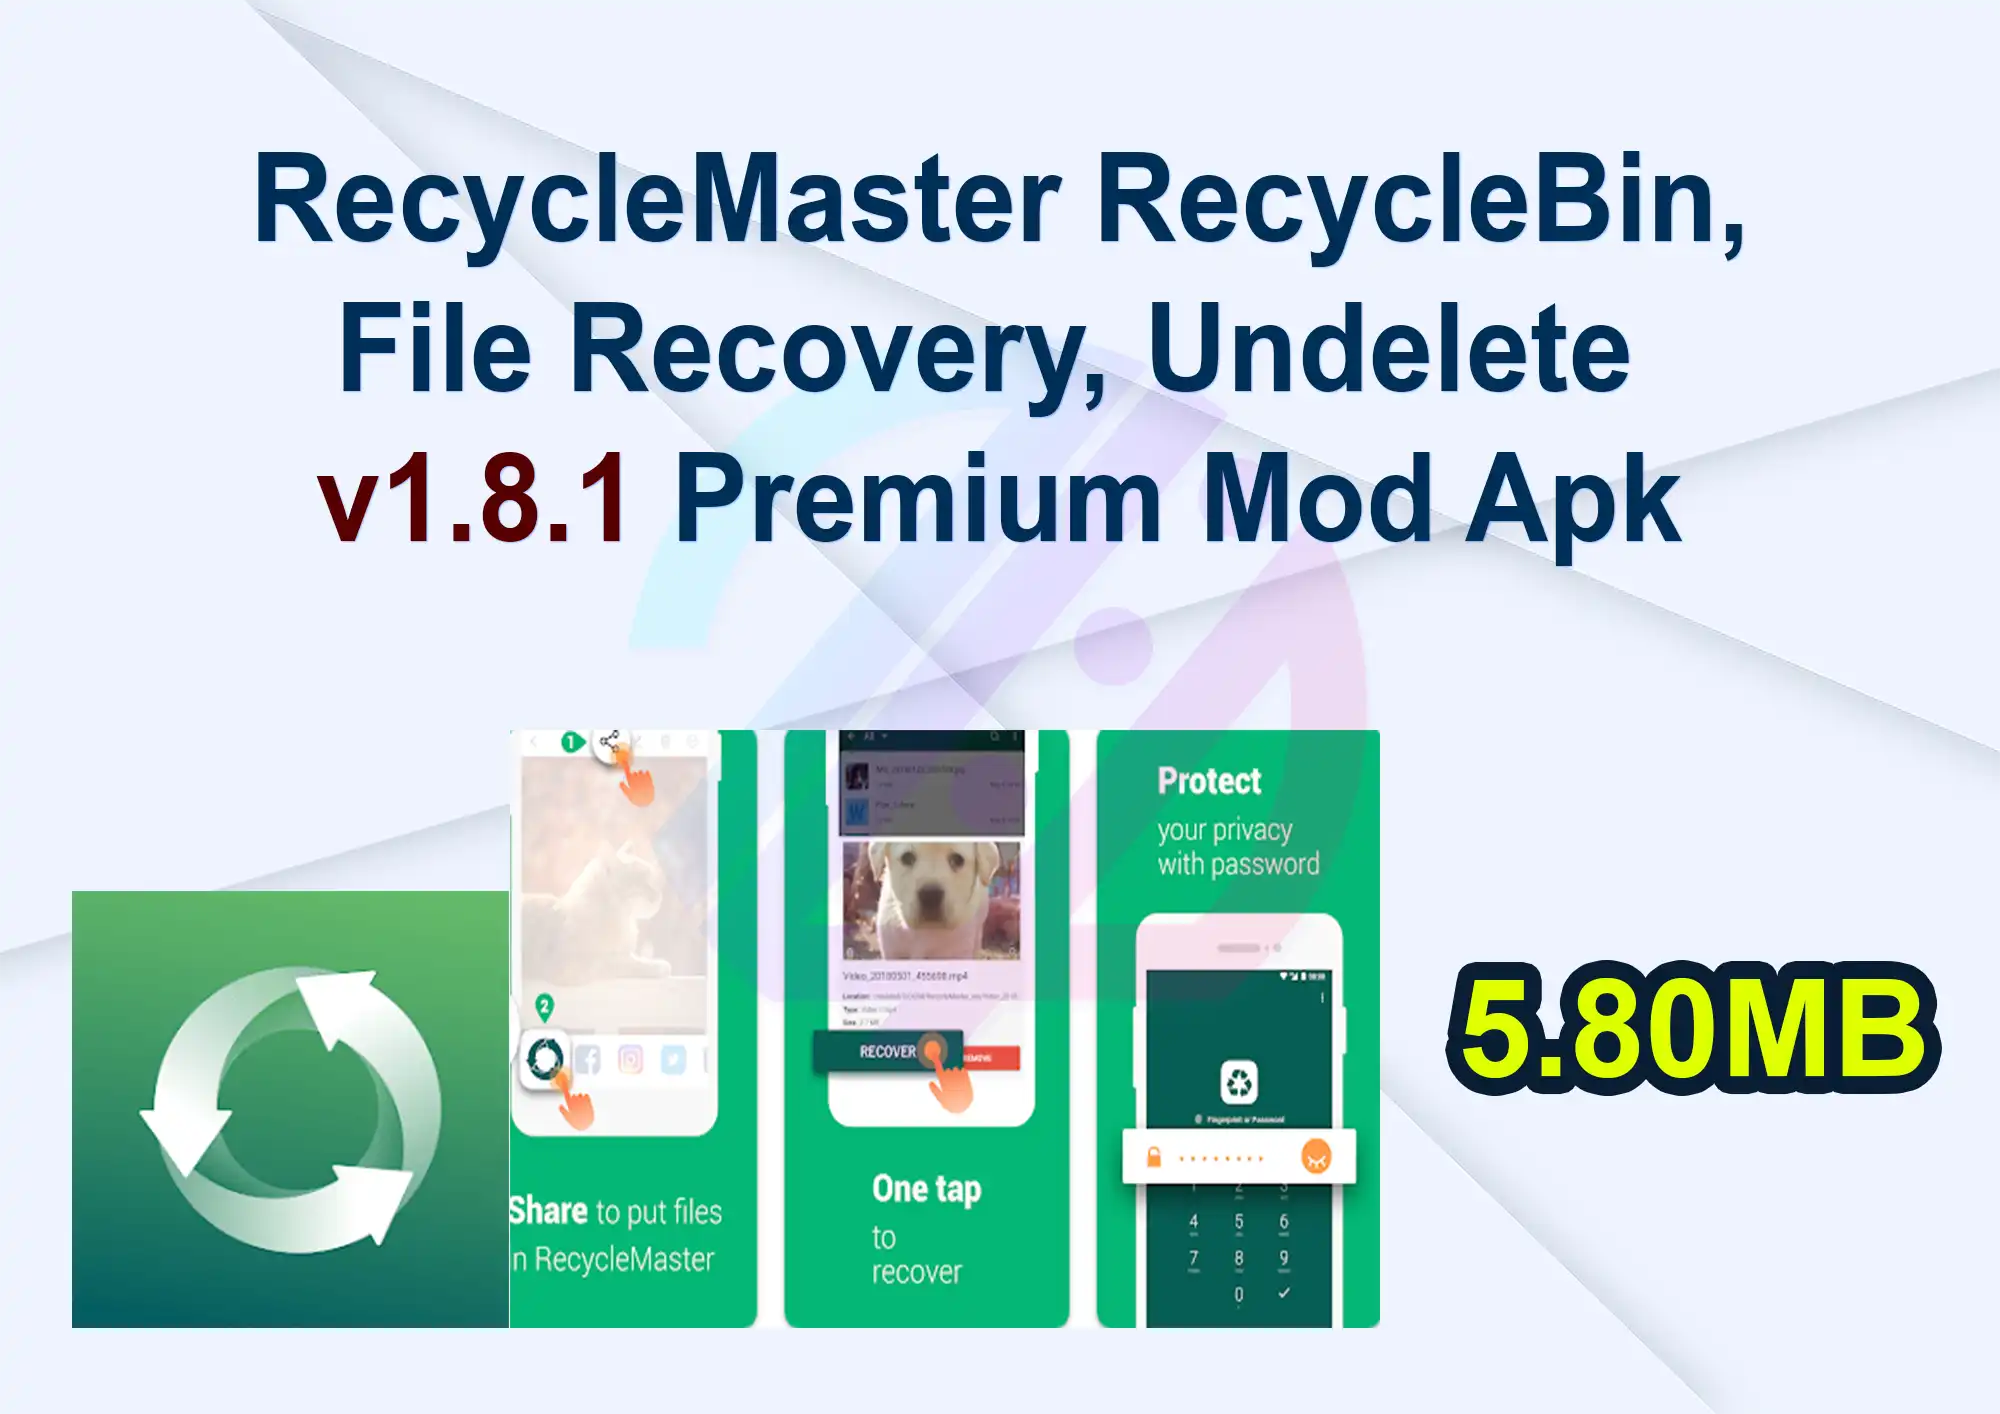 RecycleMaster: RecycleBin, File Recovery, Undelete v1.8.1 Premium Mod Apk